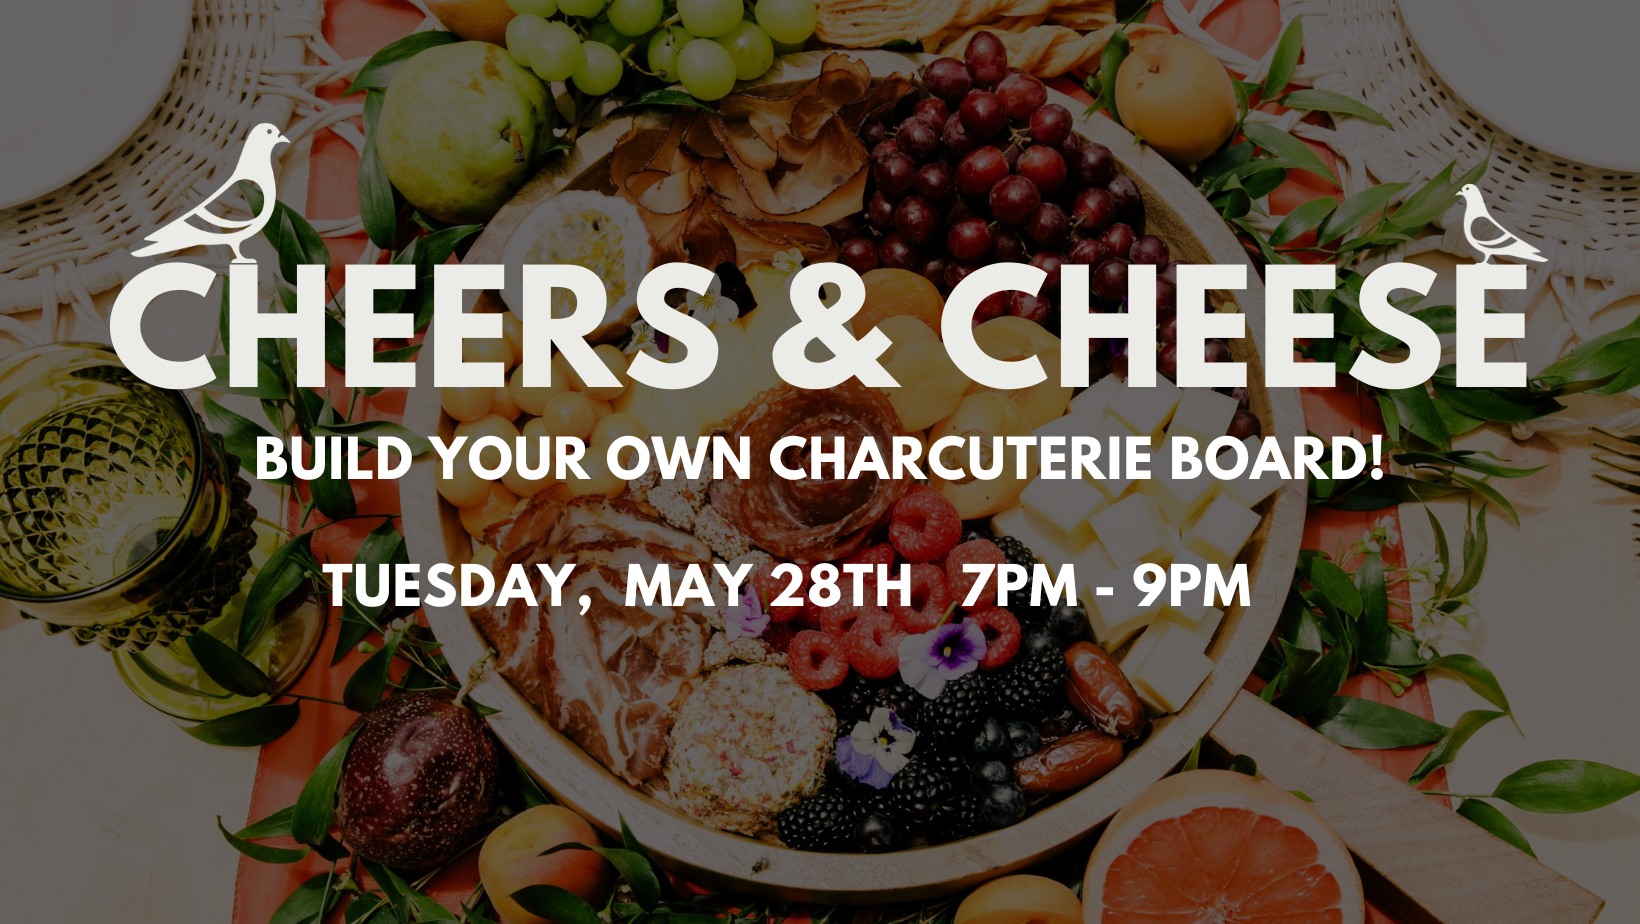 Cheers & Cheese charcuterie board event